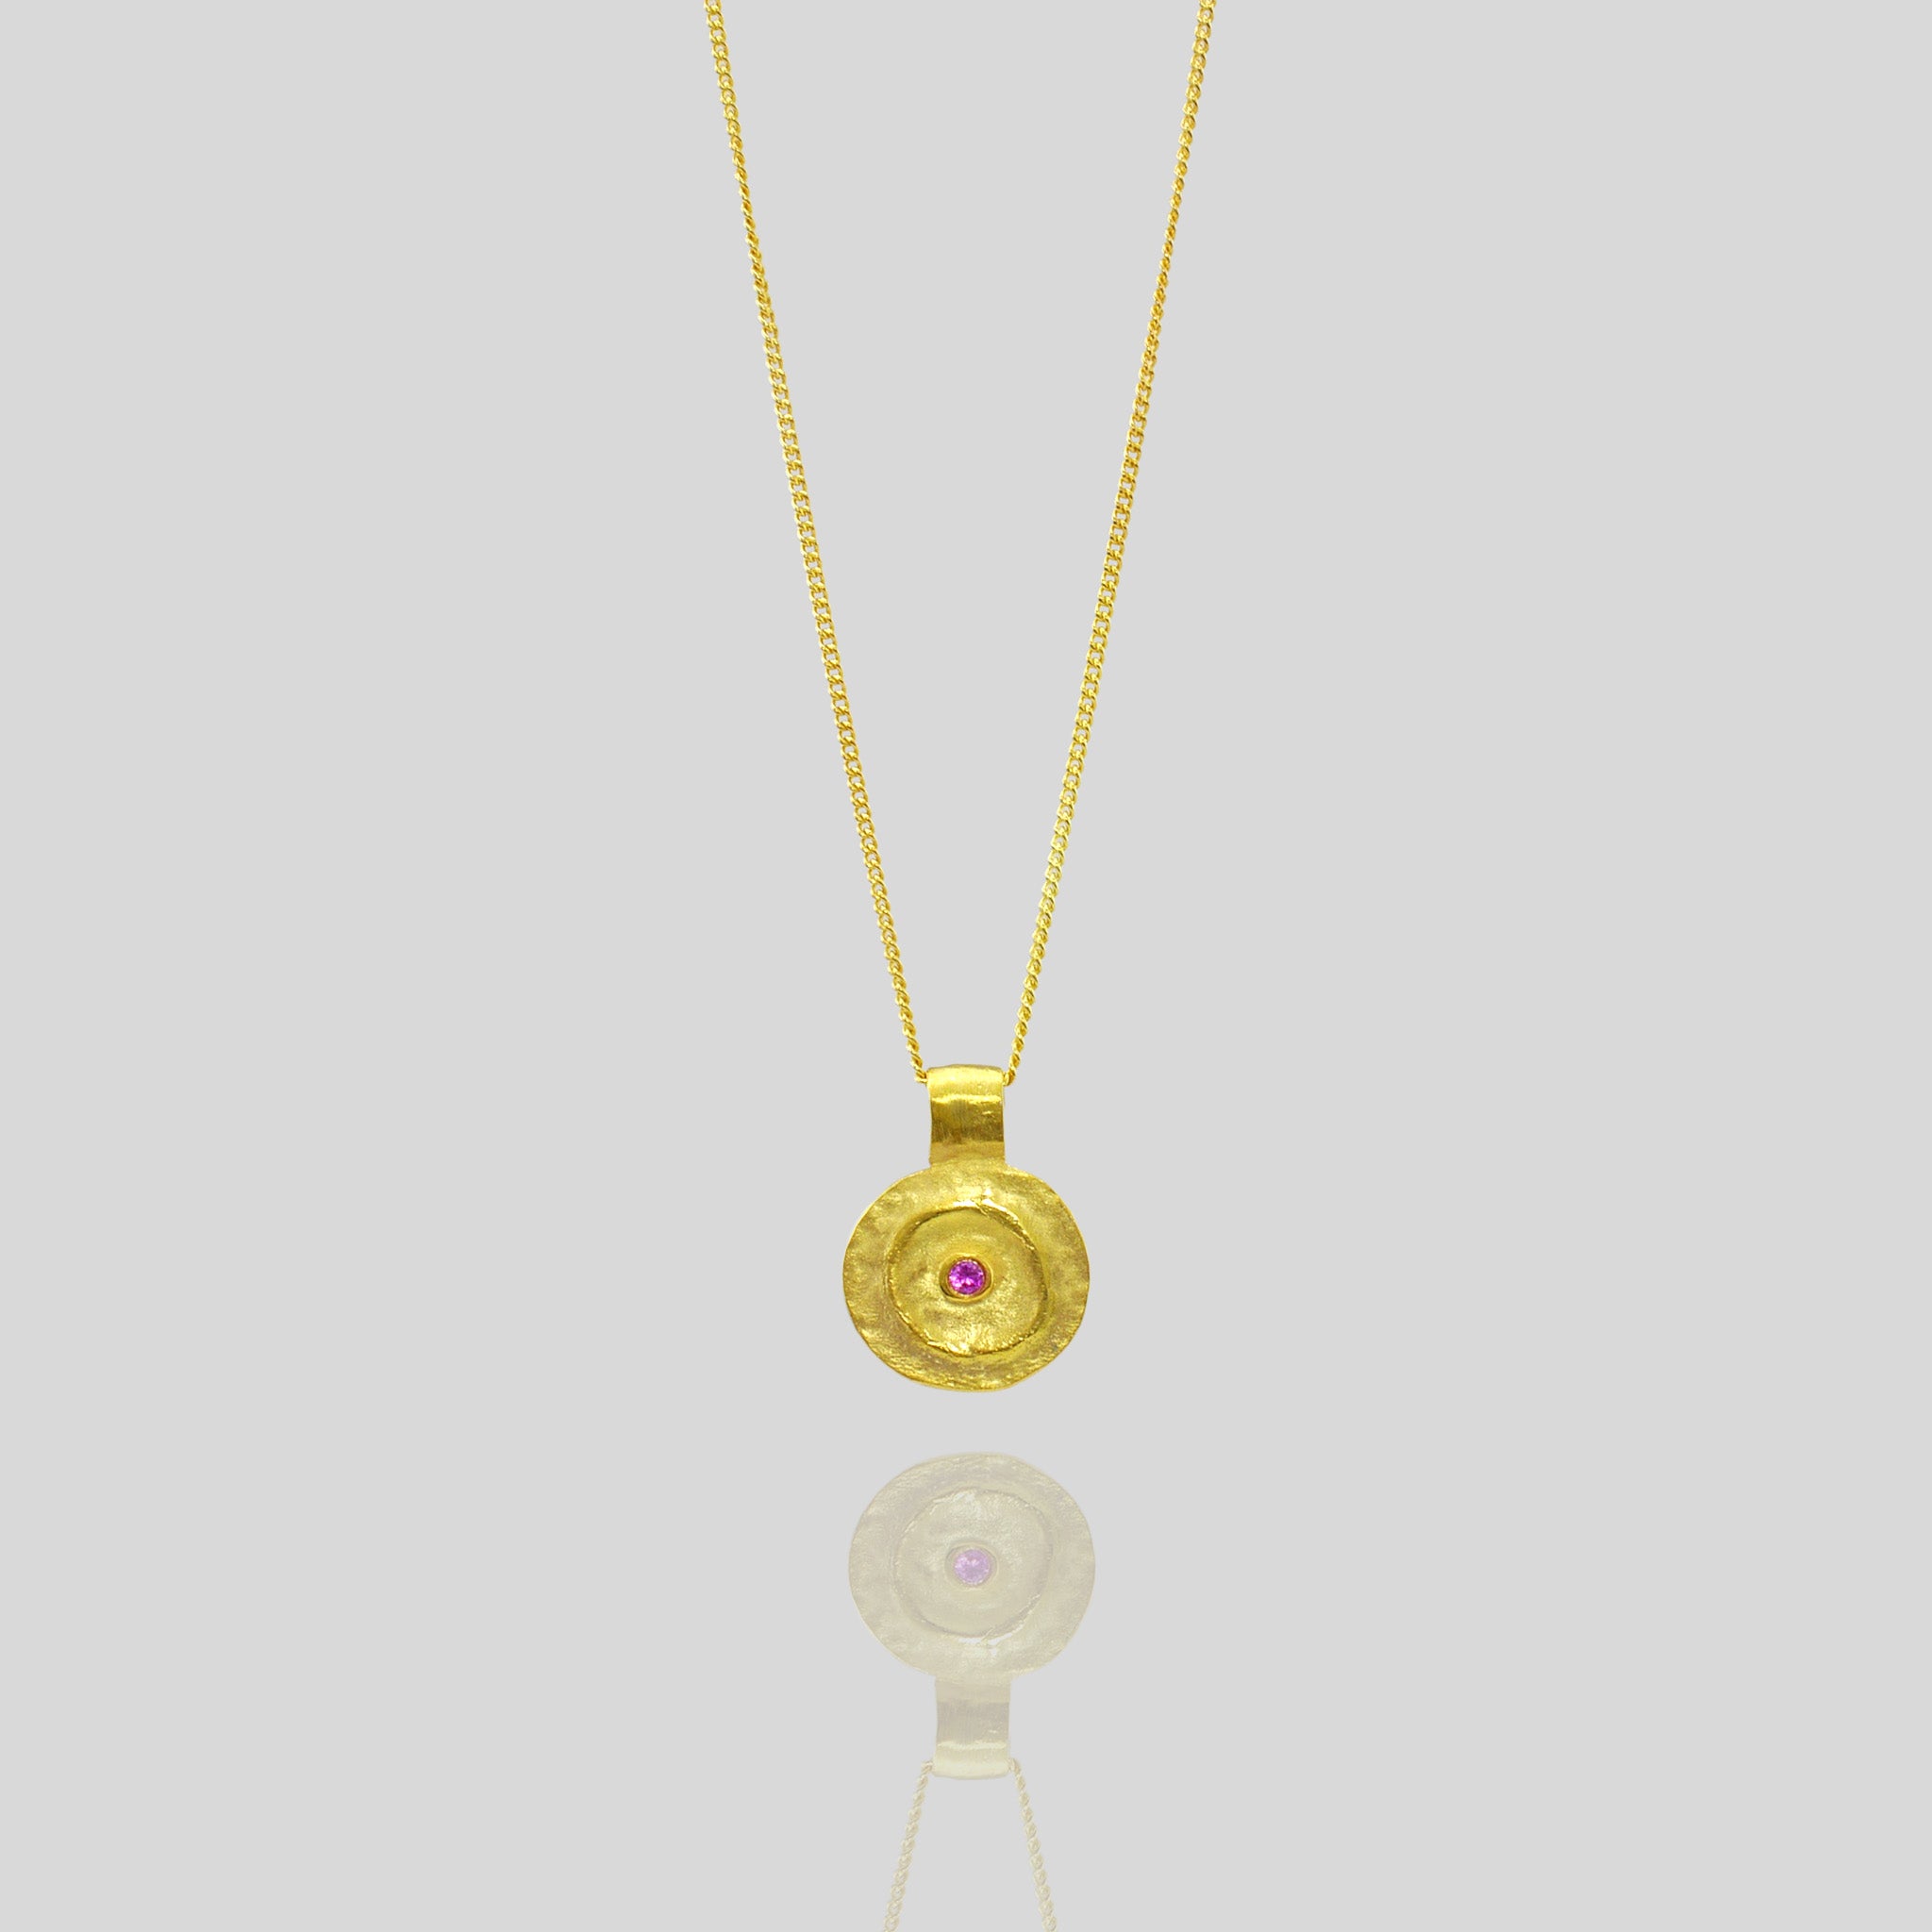 Pharaohs I - Ancient round gold pendant with a vivid Ruby gemstone at its center, reminiscent of the opulent jewelry of the Egyptian Pharaohs' era, crafted from yellow gold.